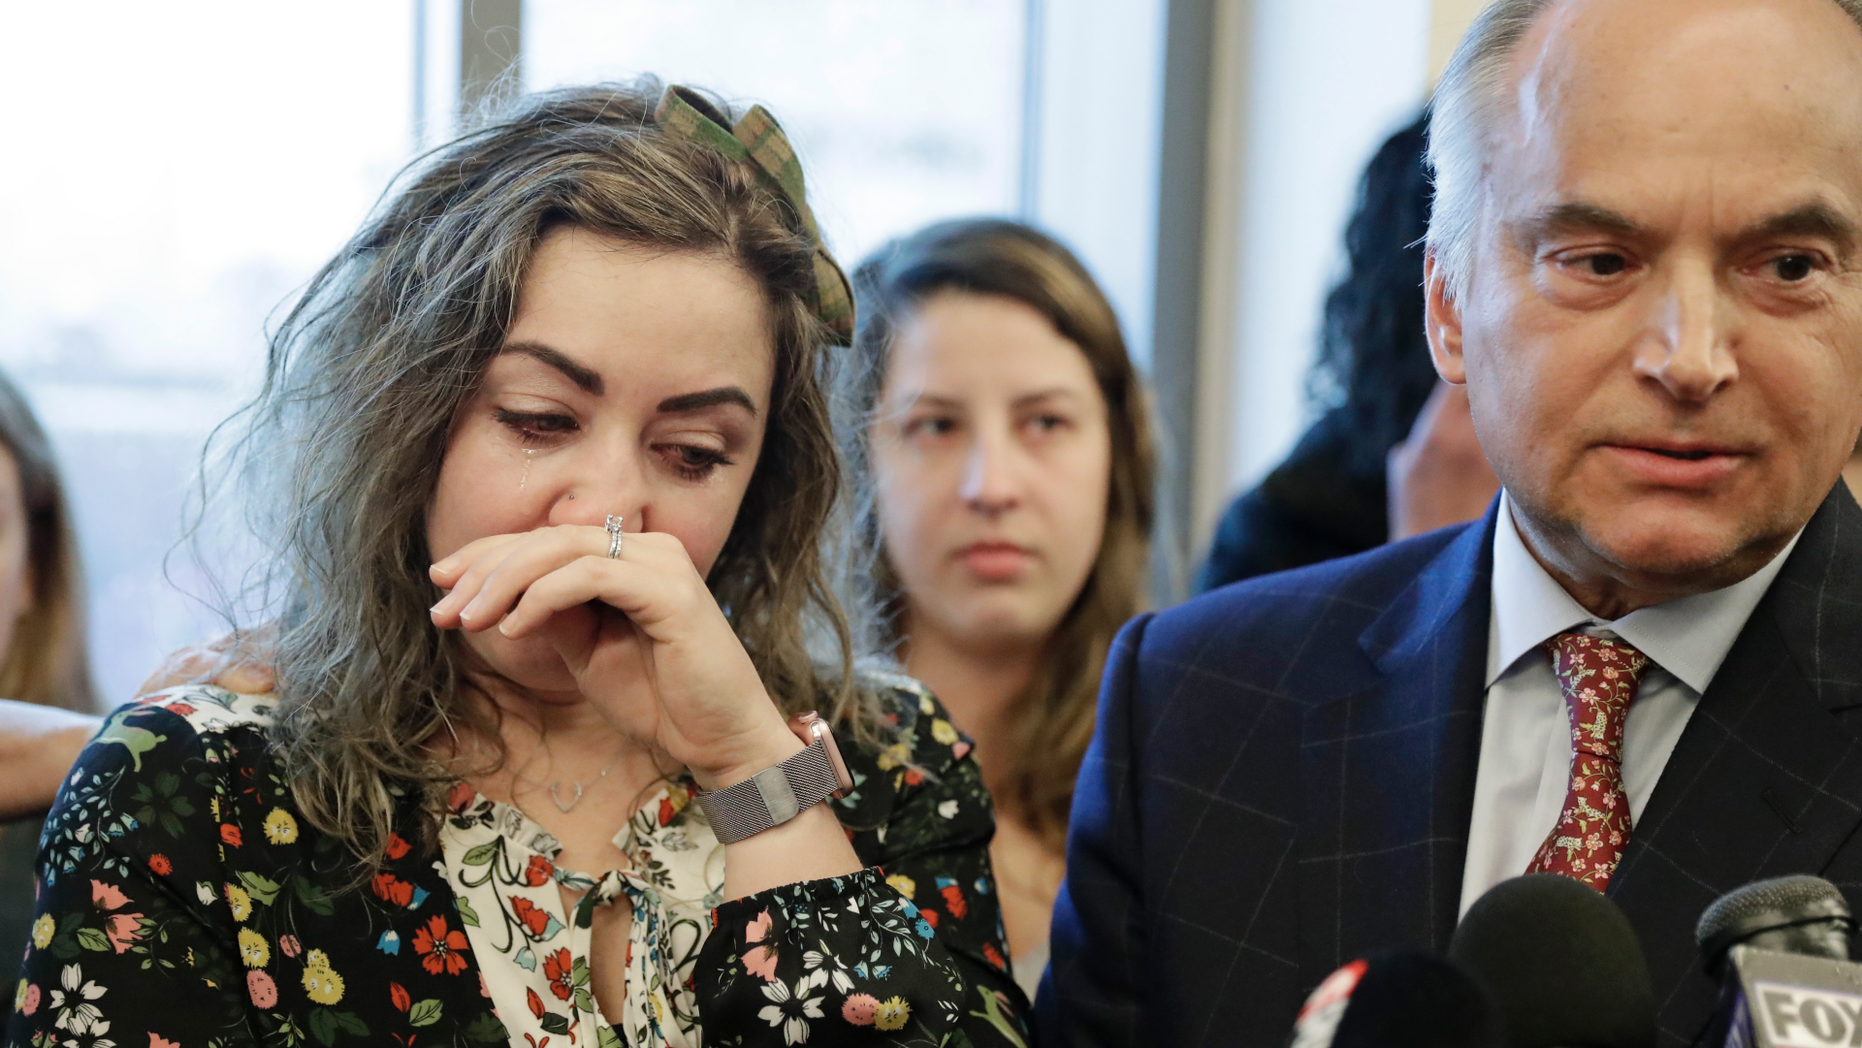 HOMICIDE RESEARCH, NOT HOMIC CRIMINAL - RaDonda Vaught, left, wipes tears as her lawyer, Peter Strianse, right, talks with reporters after a hearing on Wednesday February 20, 2019, in Nashville, Tennessee. Vaught nurse at Vanderbilt University Medical Center, is charged with reckless homicide after the death of a patient by a medication error. (AP Photo / Mark Humphrey)